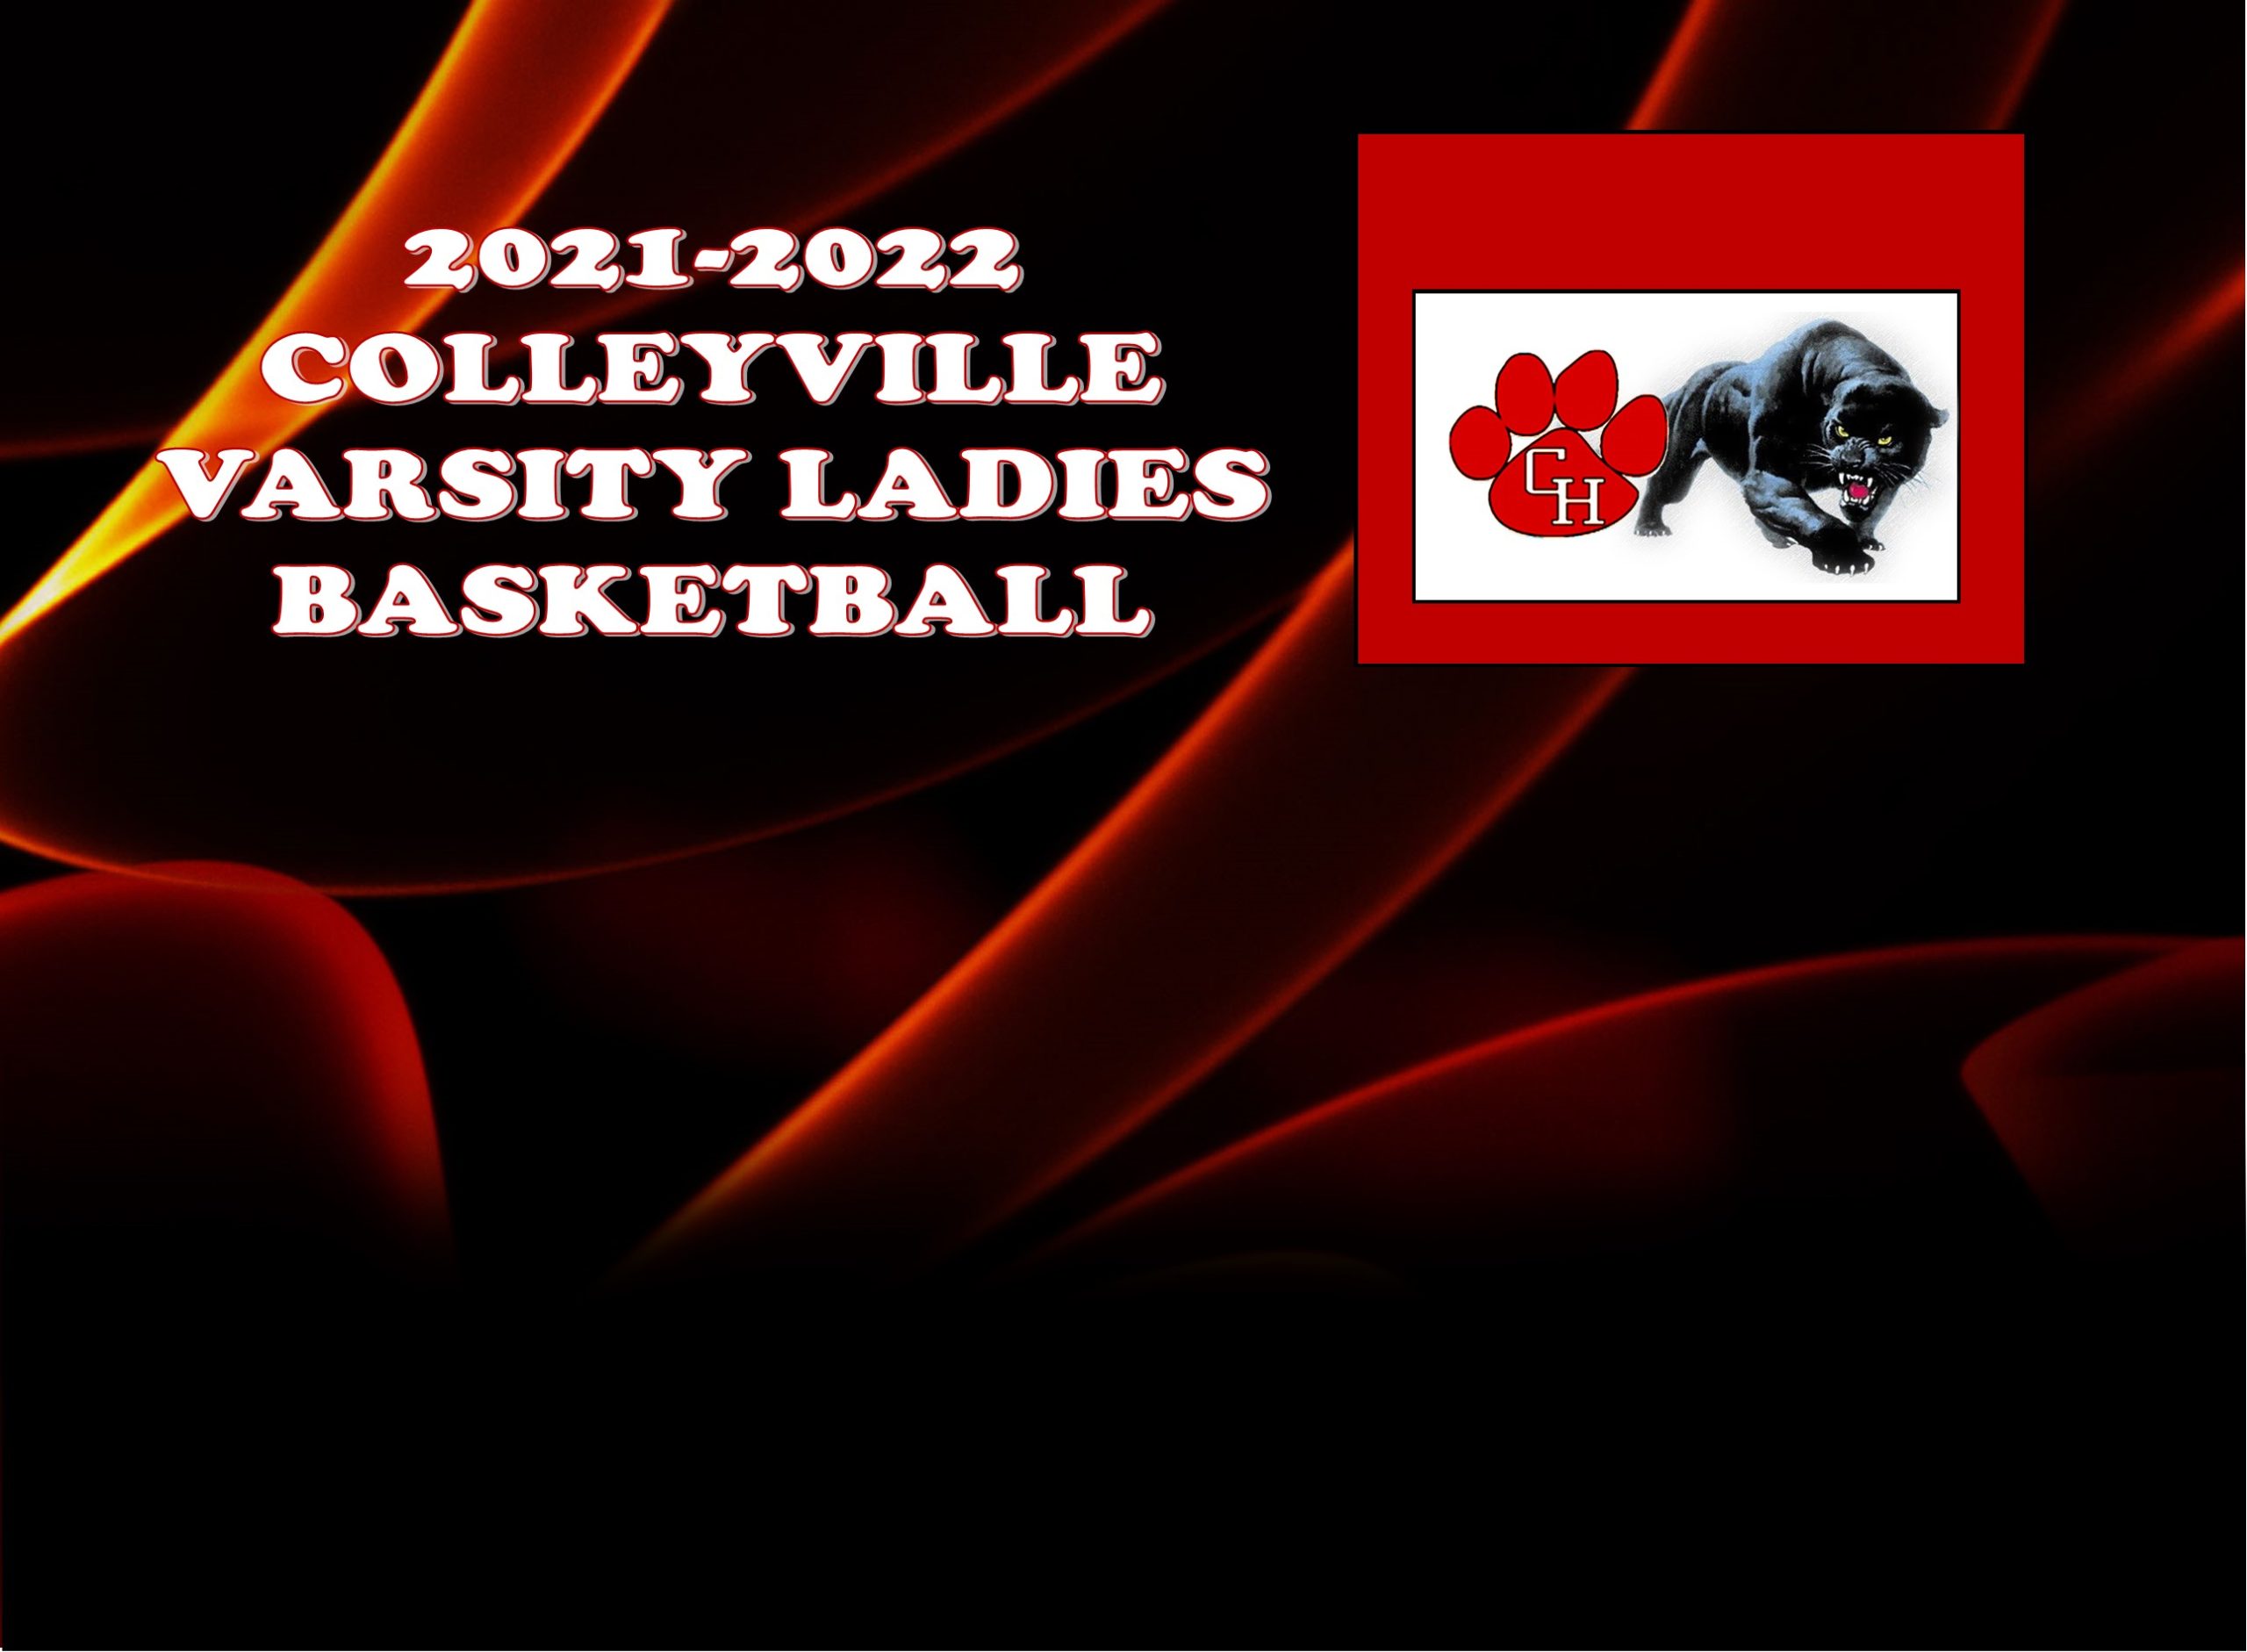 GCISD Basketball: Colleyville Lady Panthers Roll Past the Richland Lady Royals 57-36